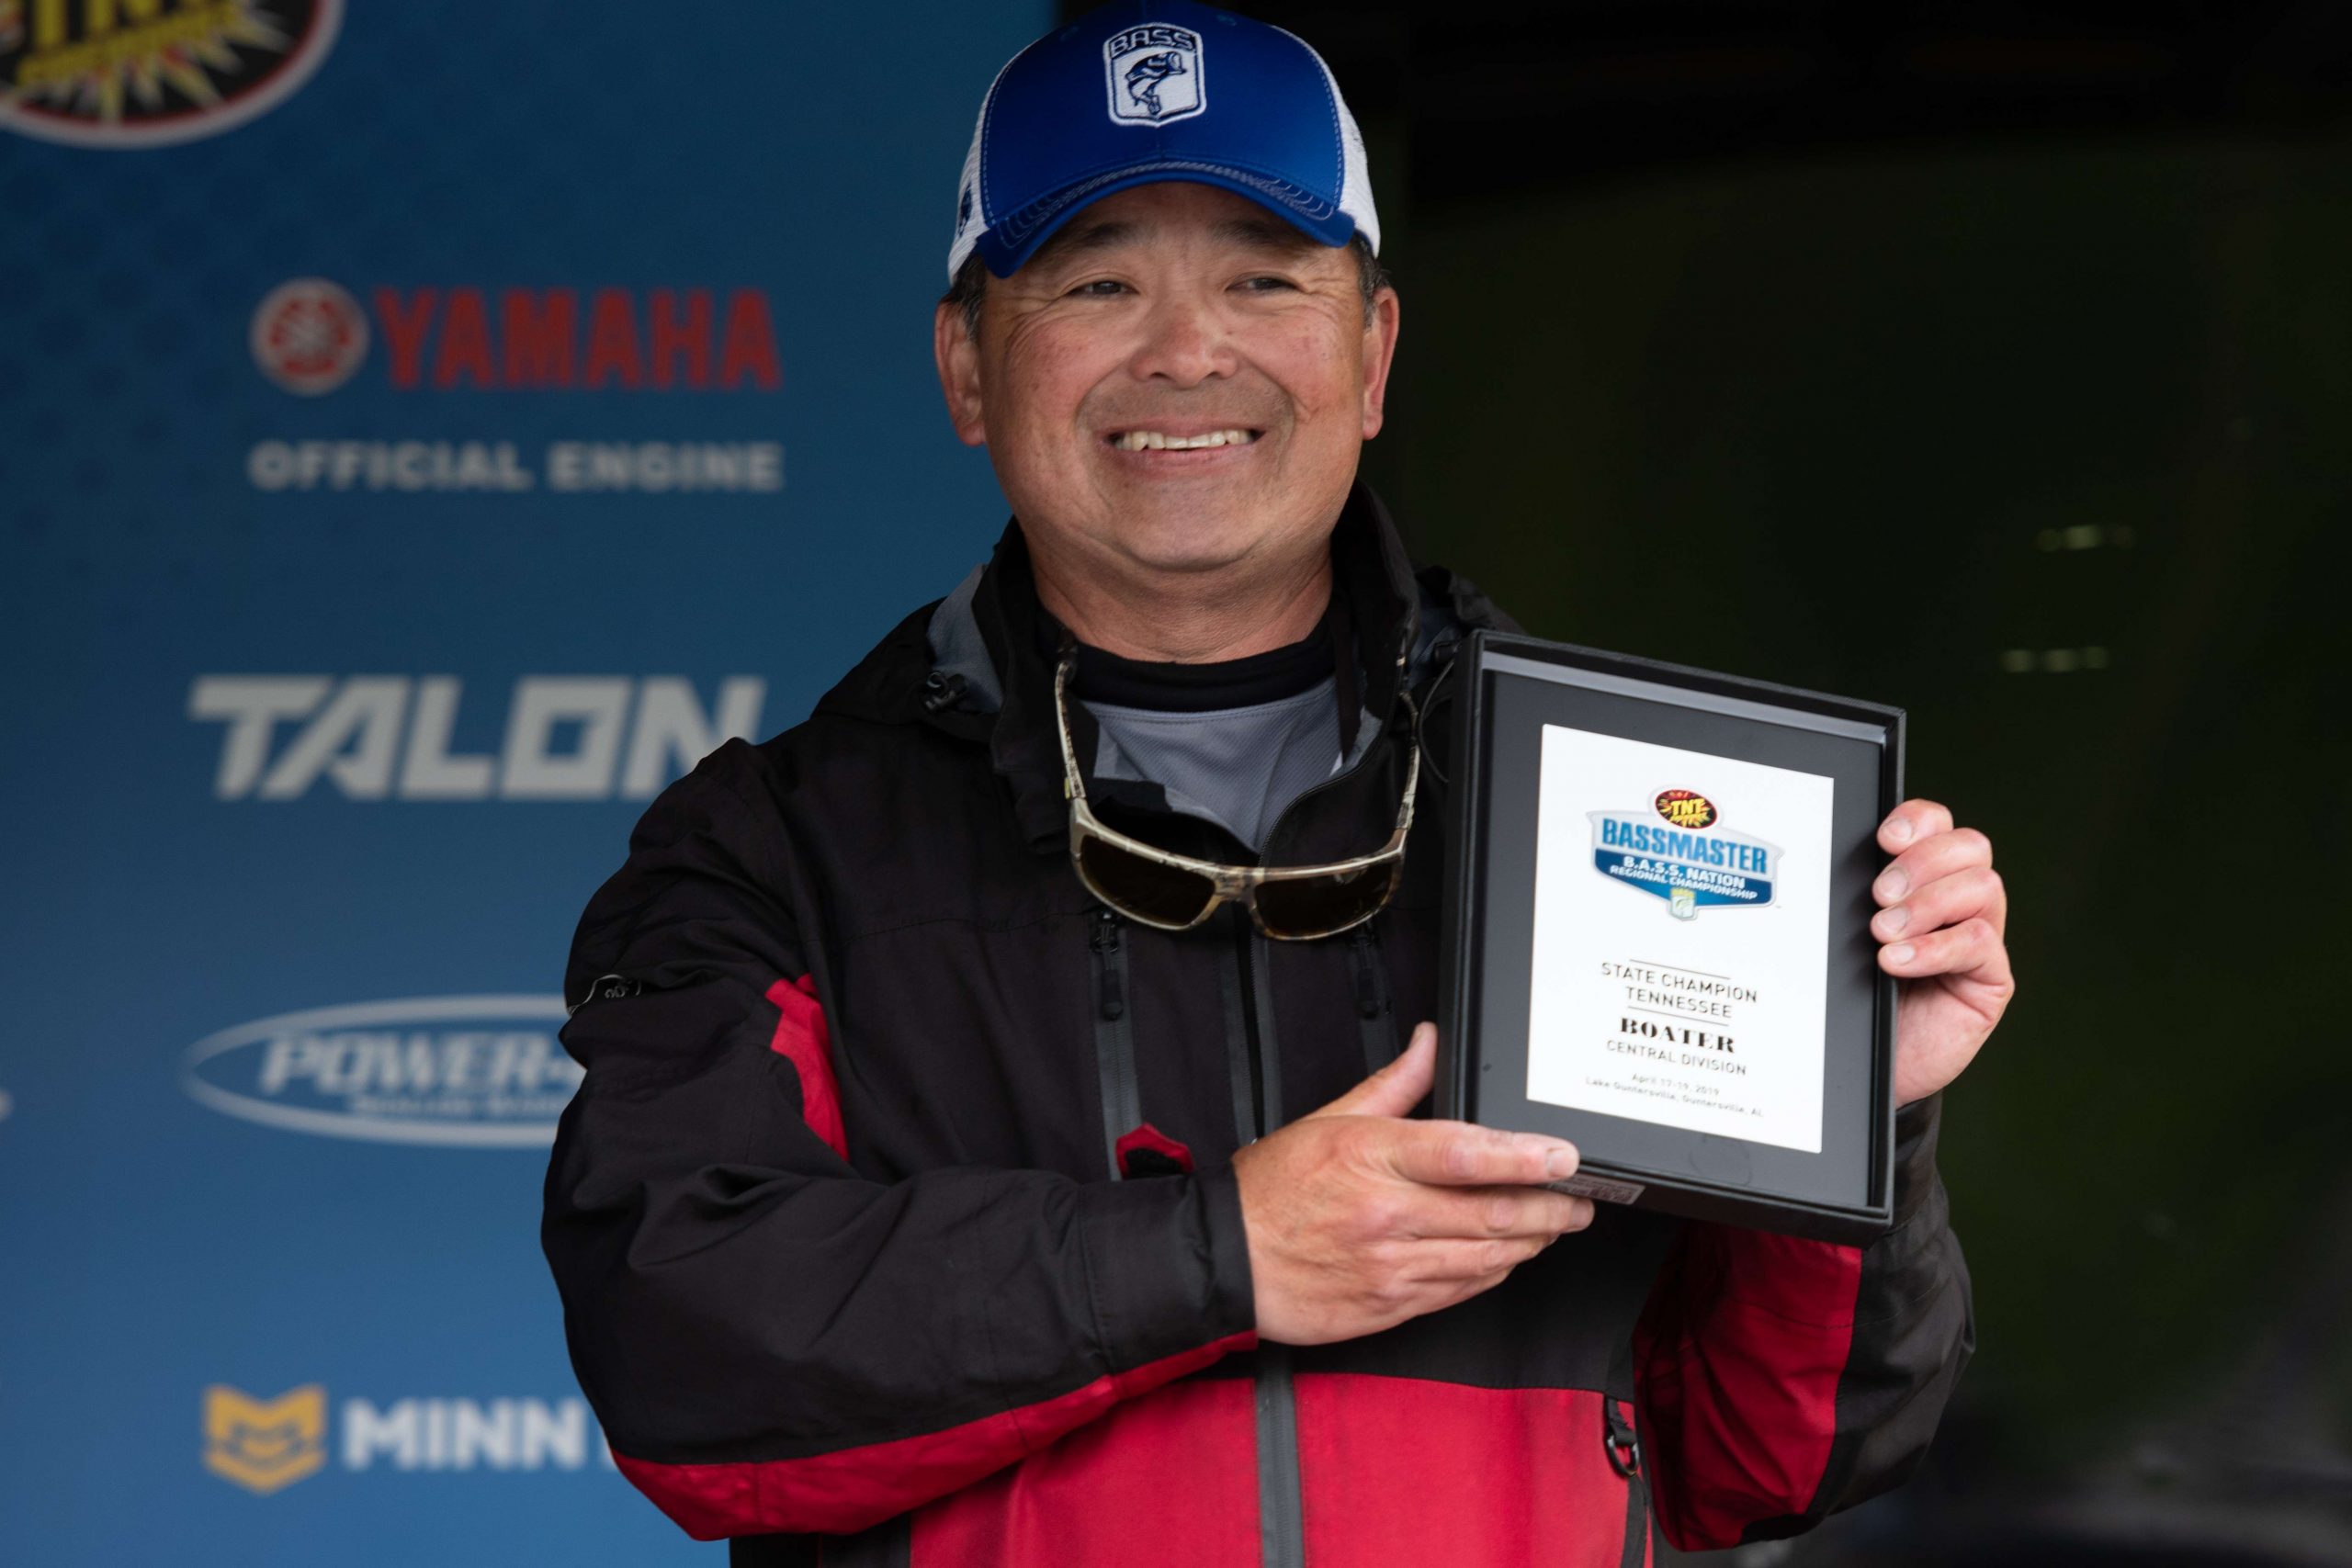 <B>  Nobuyuki Terajima </B><BR> 
Tennessee Boater<BR>
B.A.S.S. Nation Club:  Franklin Fishing League<BR>
Occupation:  Coordinator <BR>
Hobbies:  Photography  
